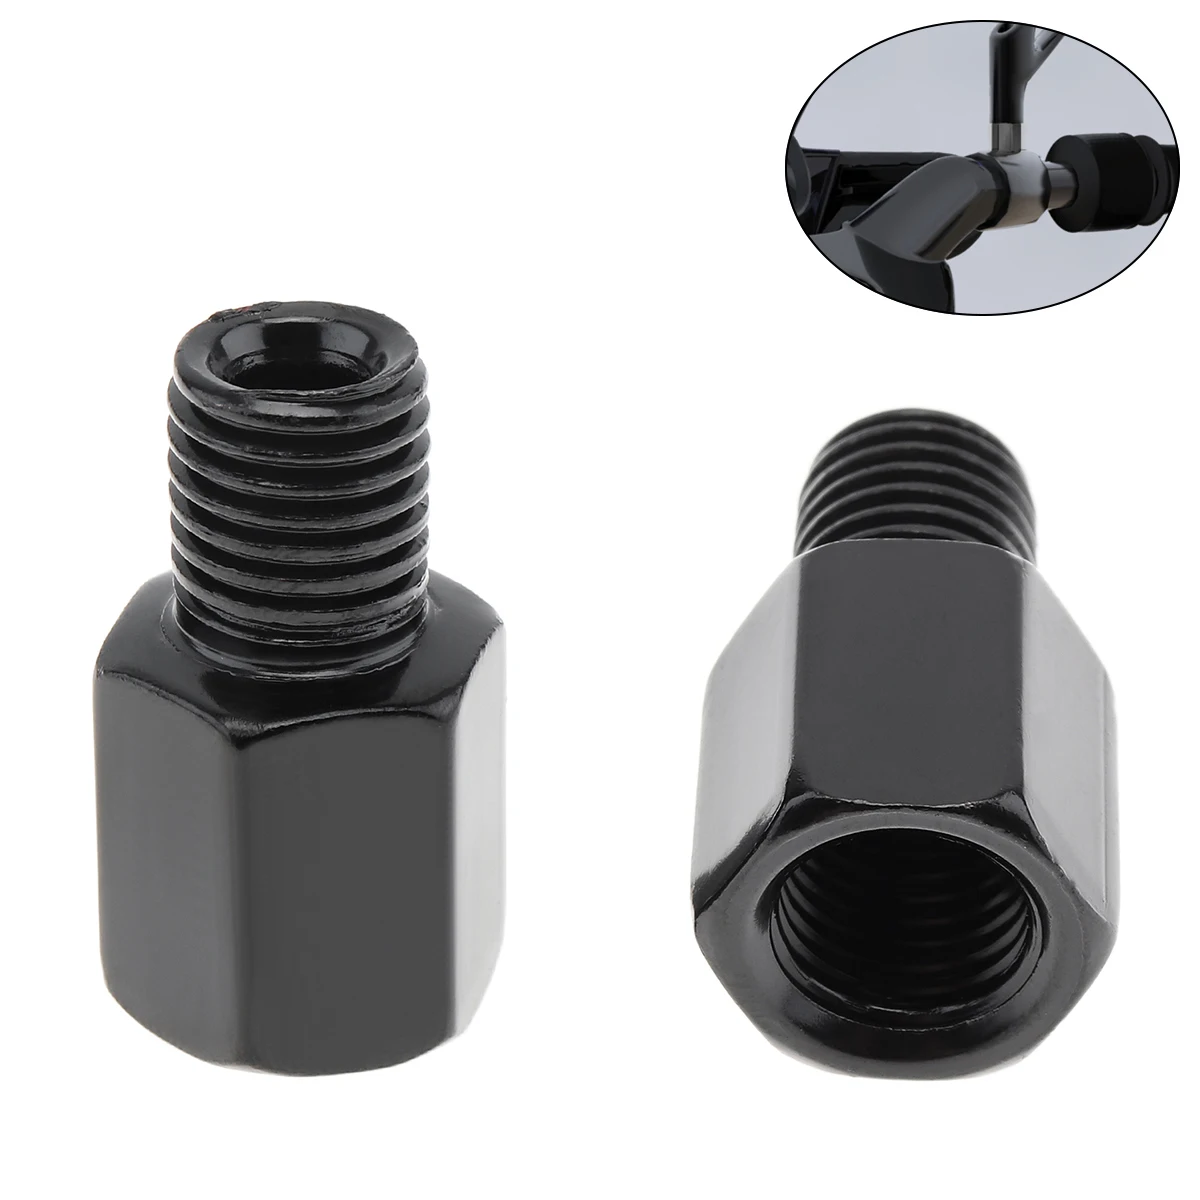 

1pcs Motorcycle Rear View Mirrors Adapter Motorbike Side Mirror Holder Bolts Screw Clockwise 10mm to 10mm